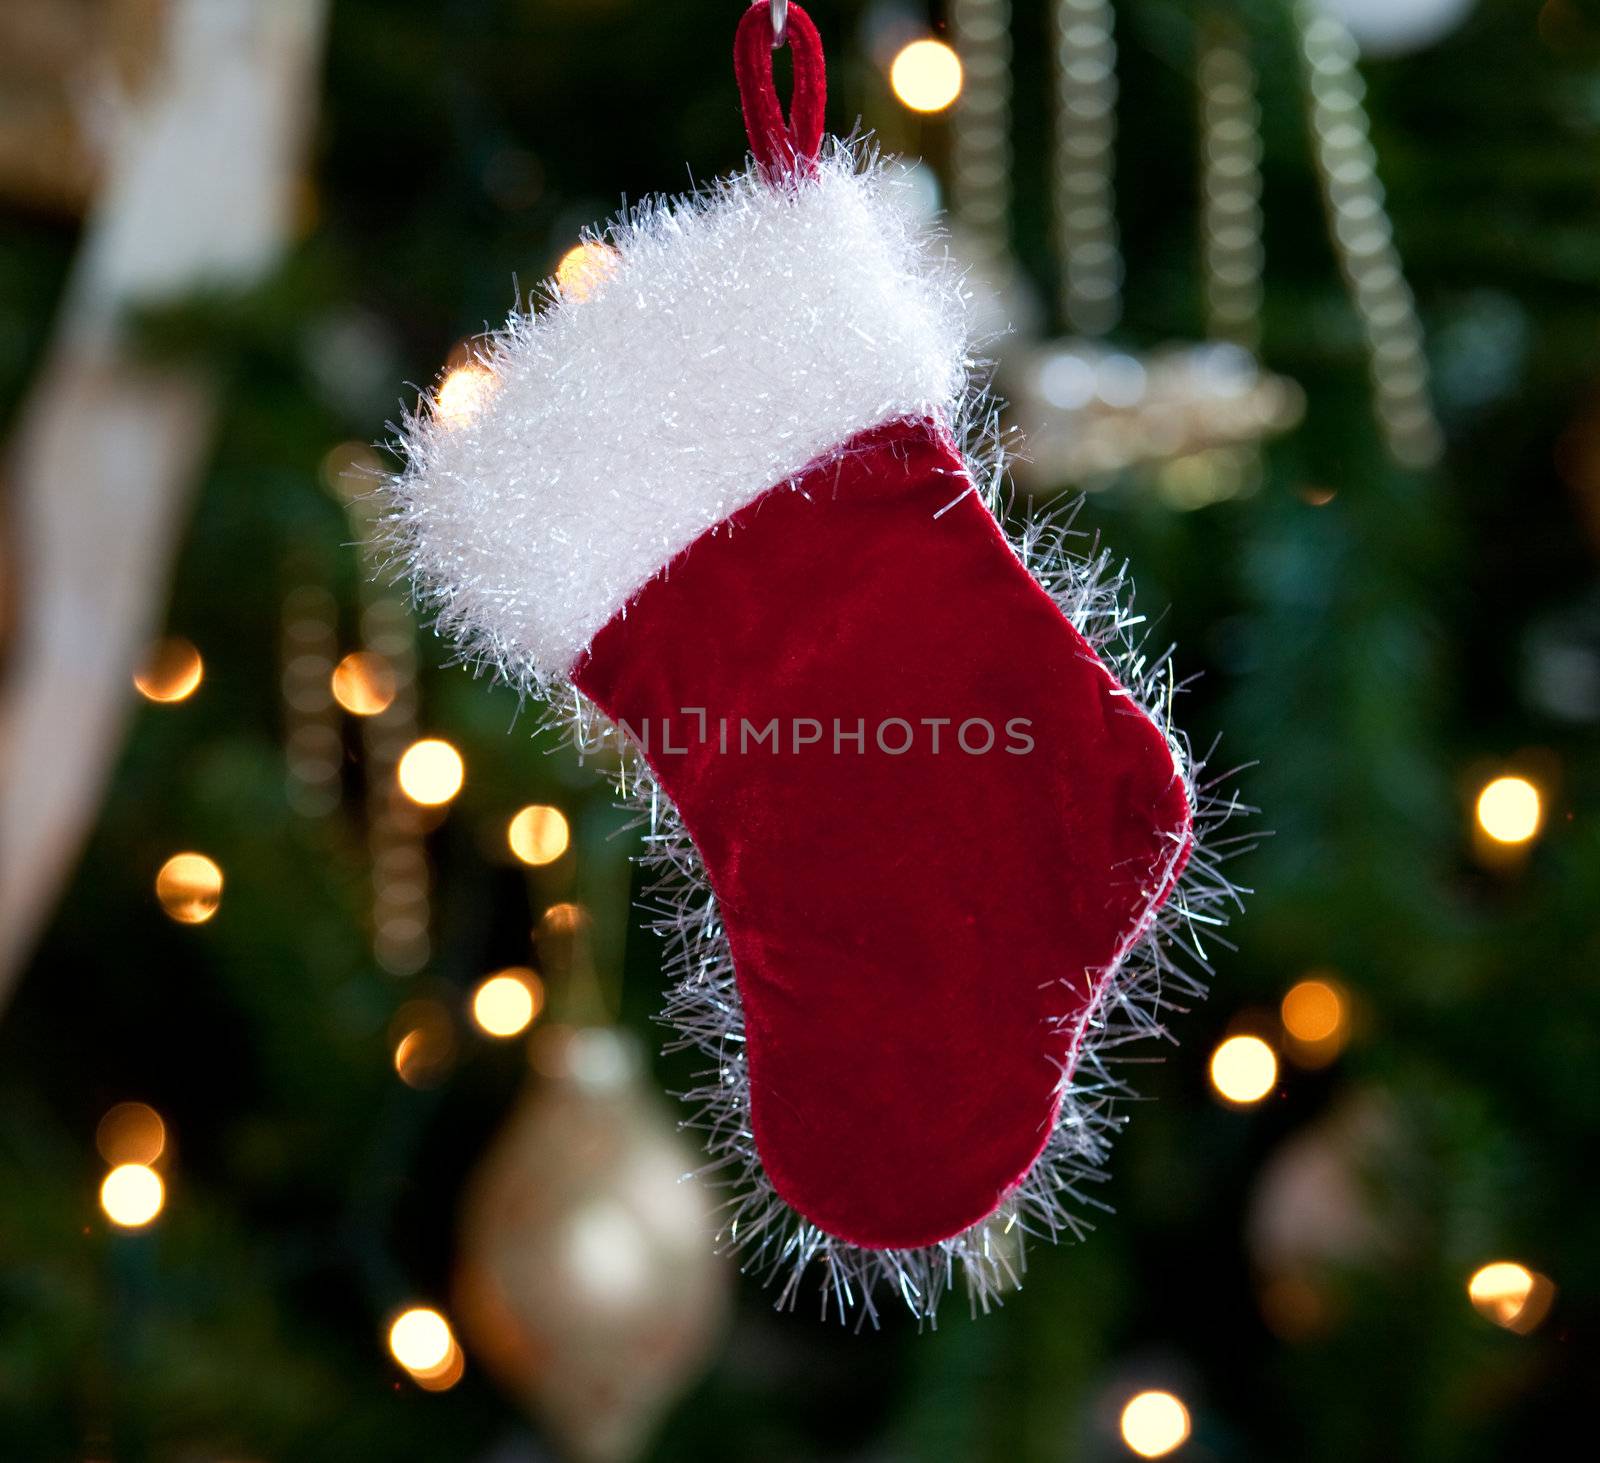 Fur lined stocking in front of xmas tree by steheap